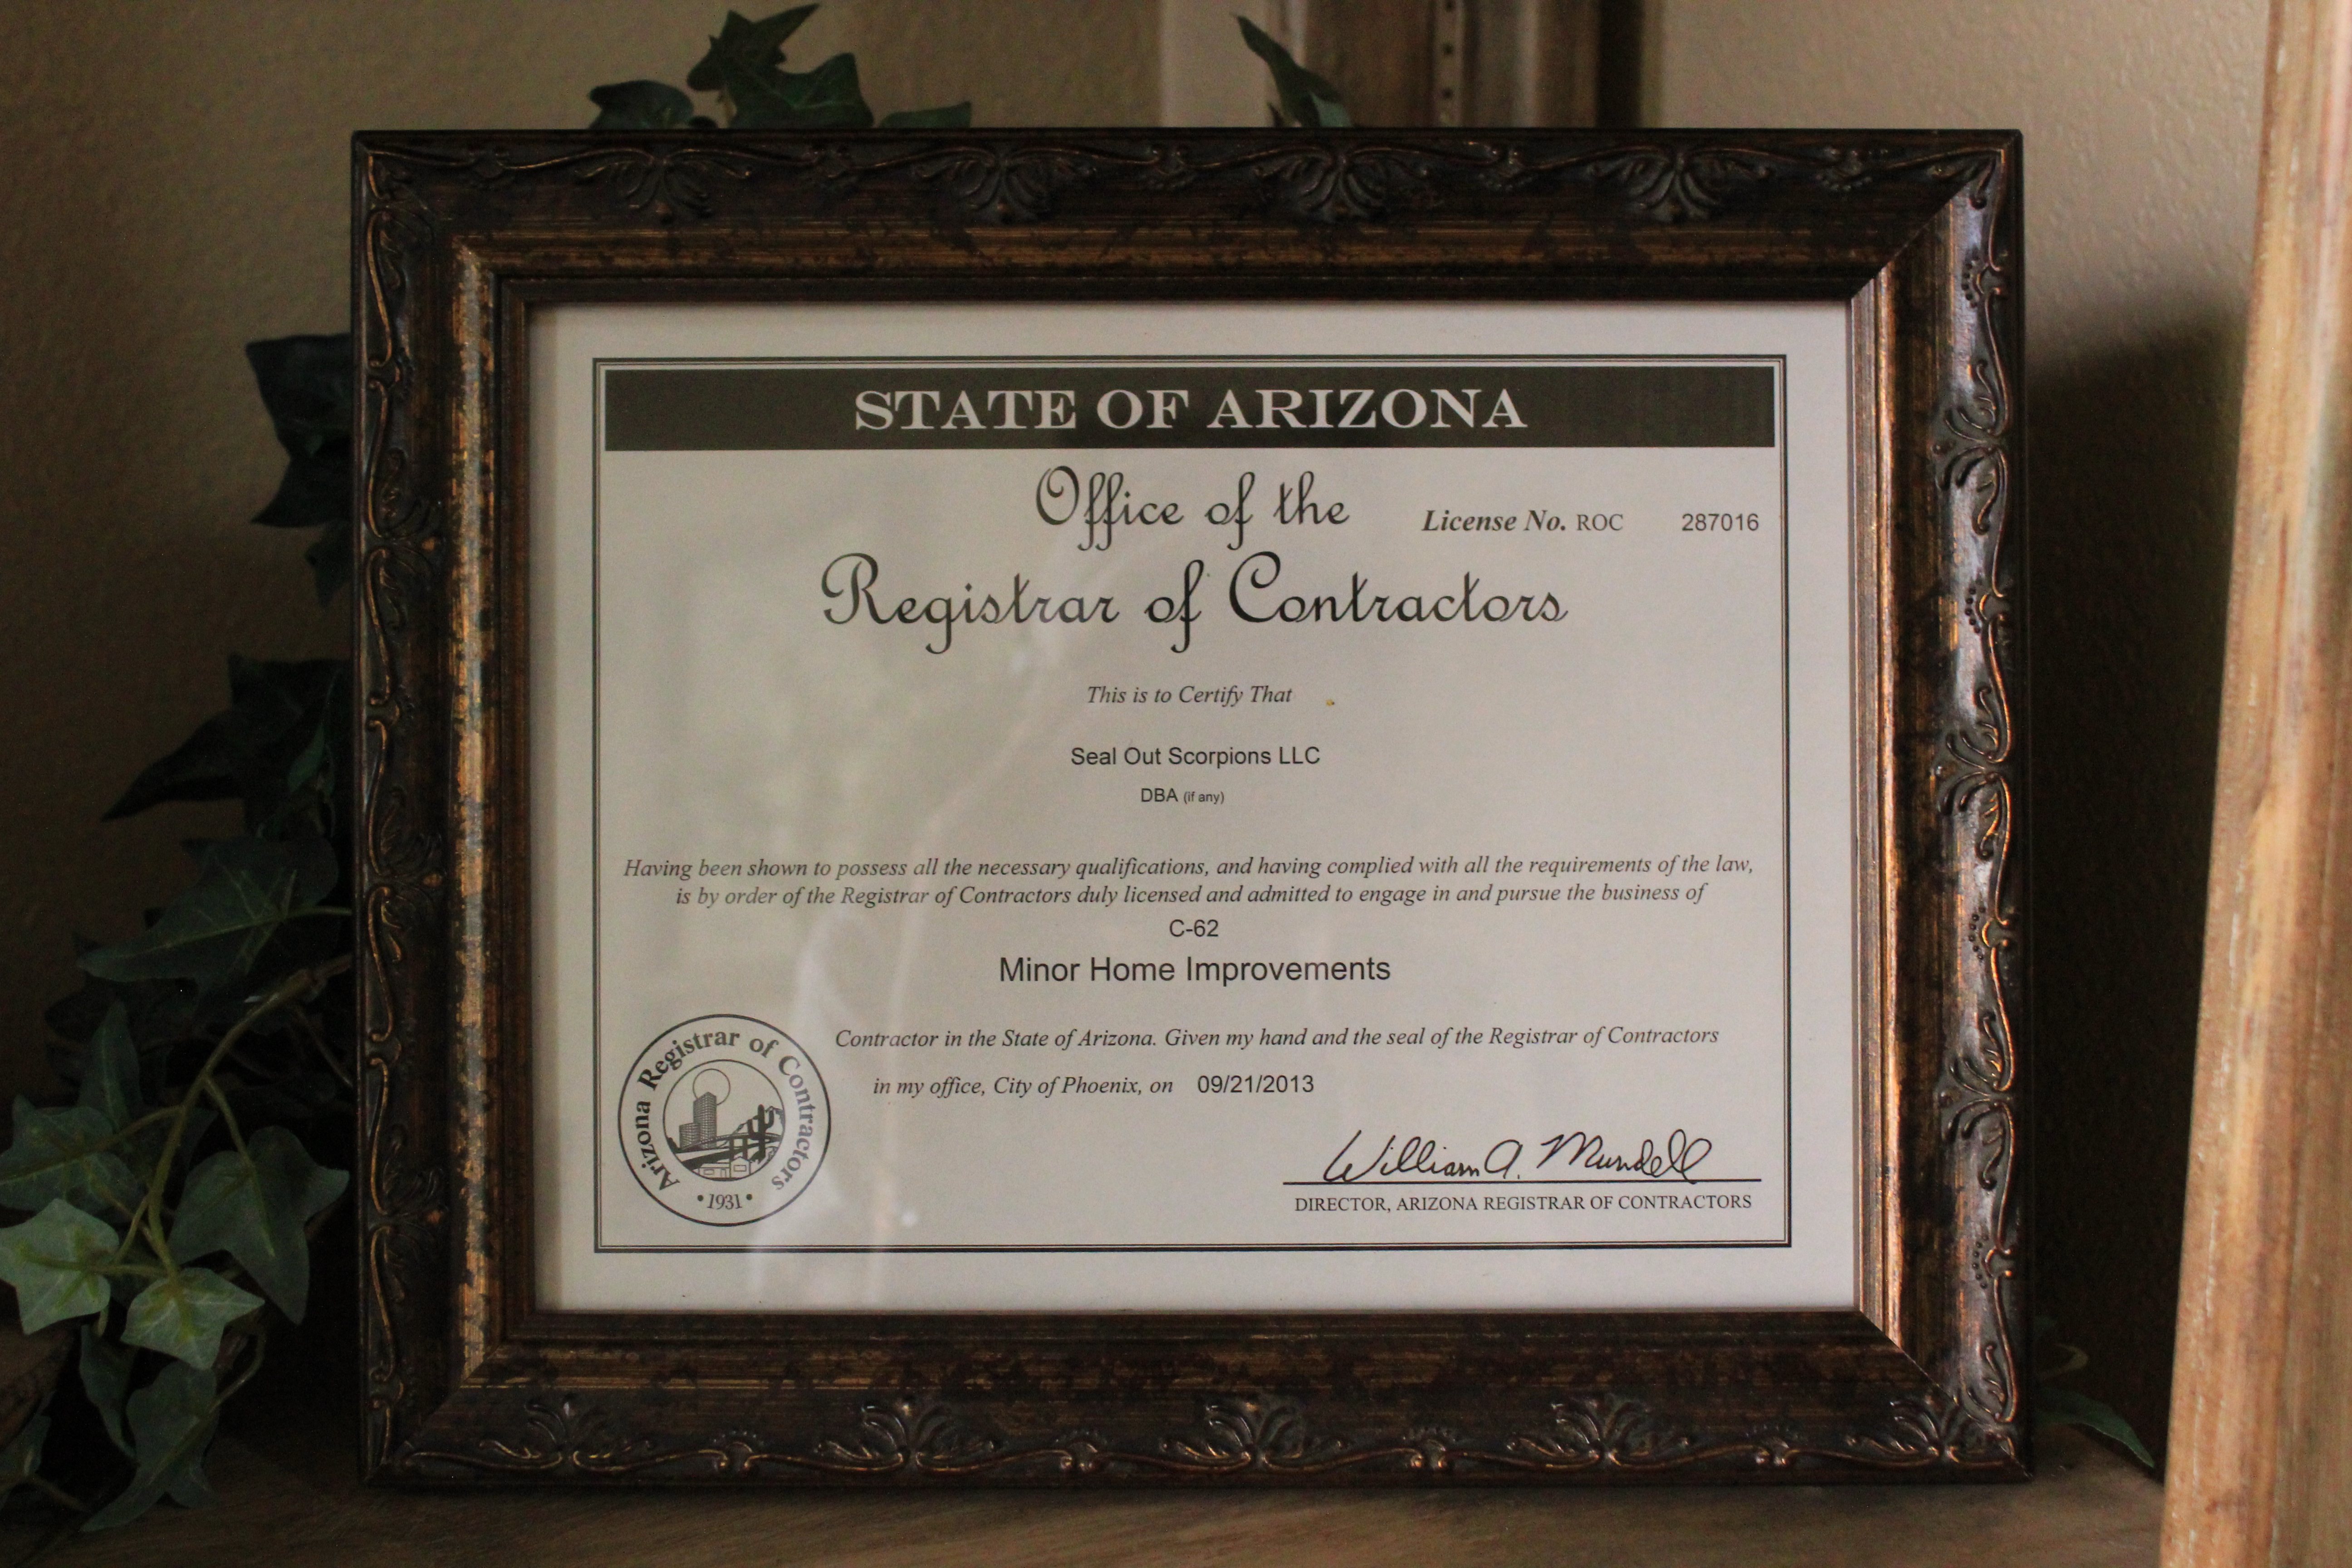 Our scorpion prevention company has a flawless record with the Arizona Registrar of Contractors